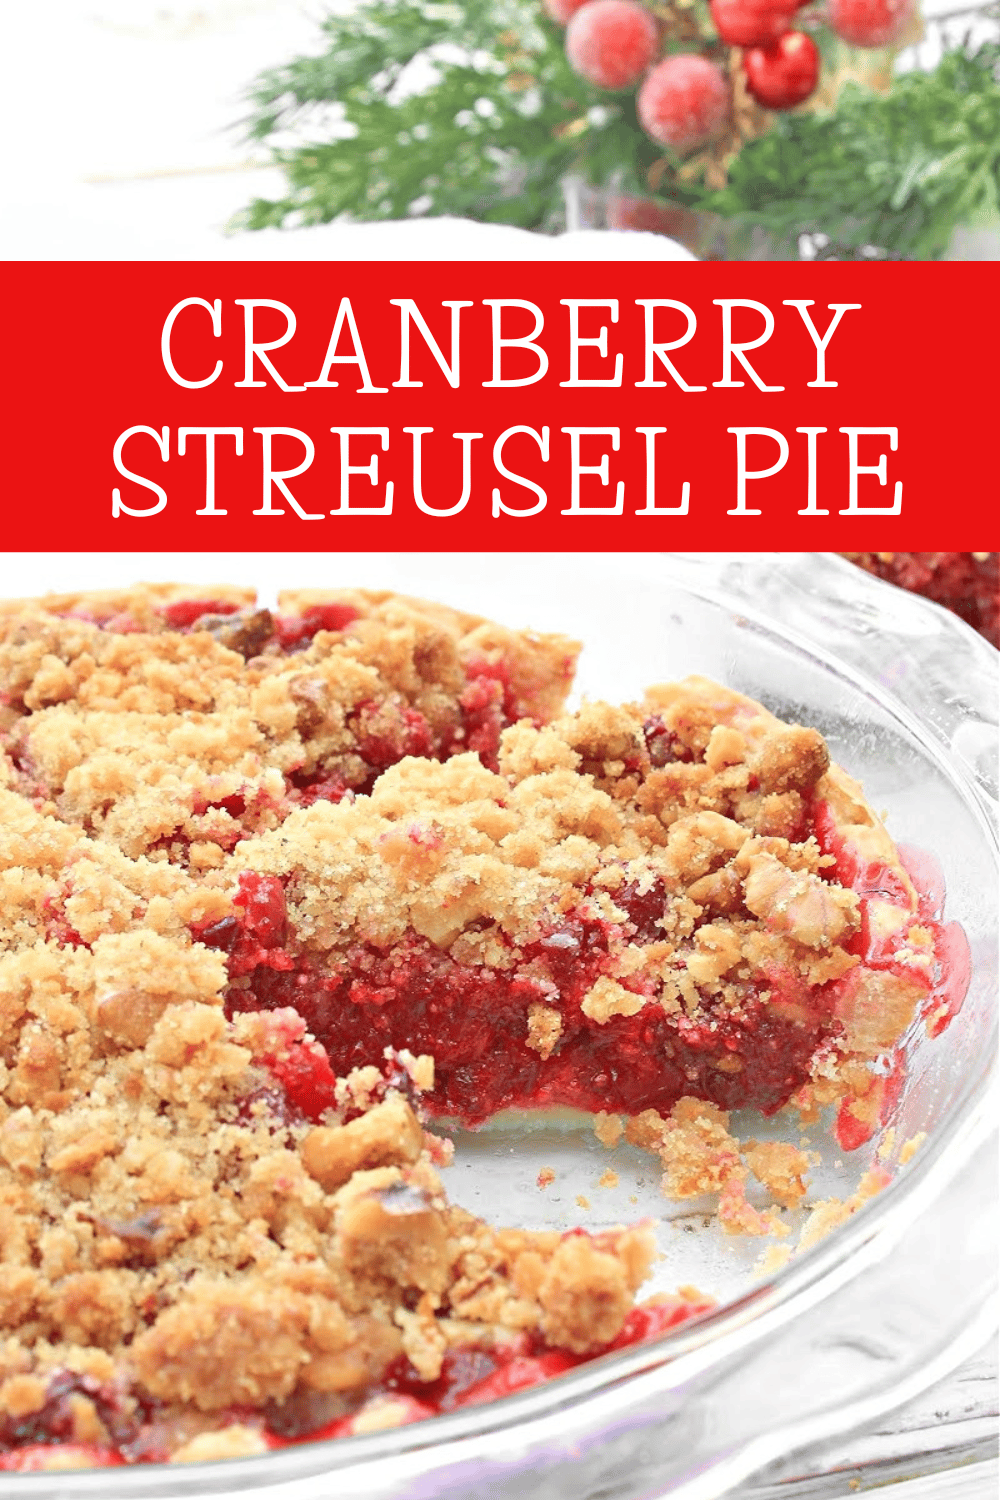 Cranberry Pie ~ Fresh cranberry pie, made with sweetened cranberries and crumbly streusel topping, is perfect for the holidays!  via @thiswifecooks